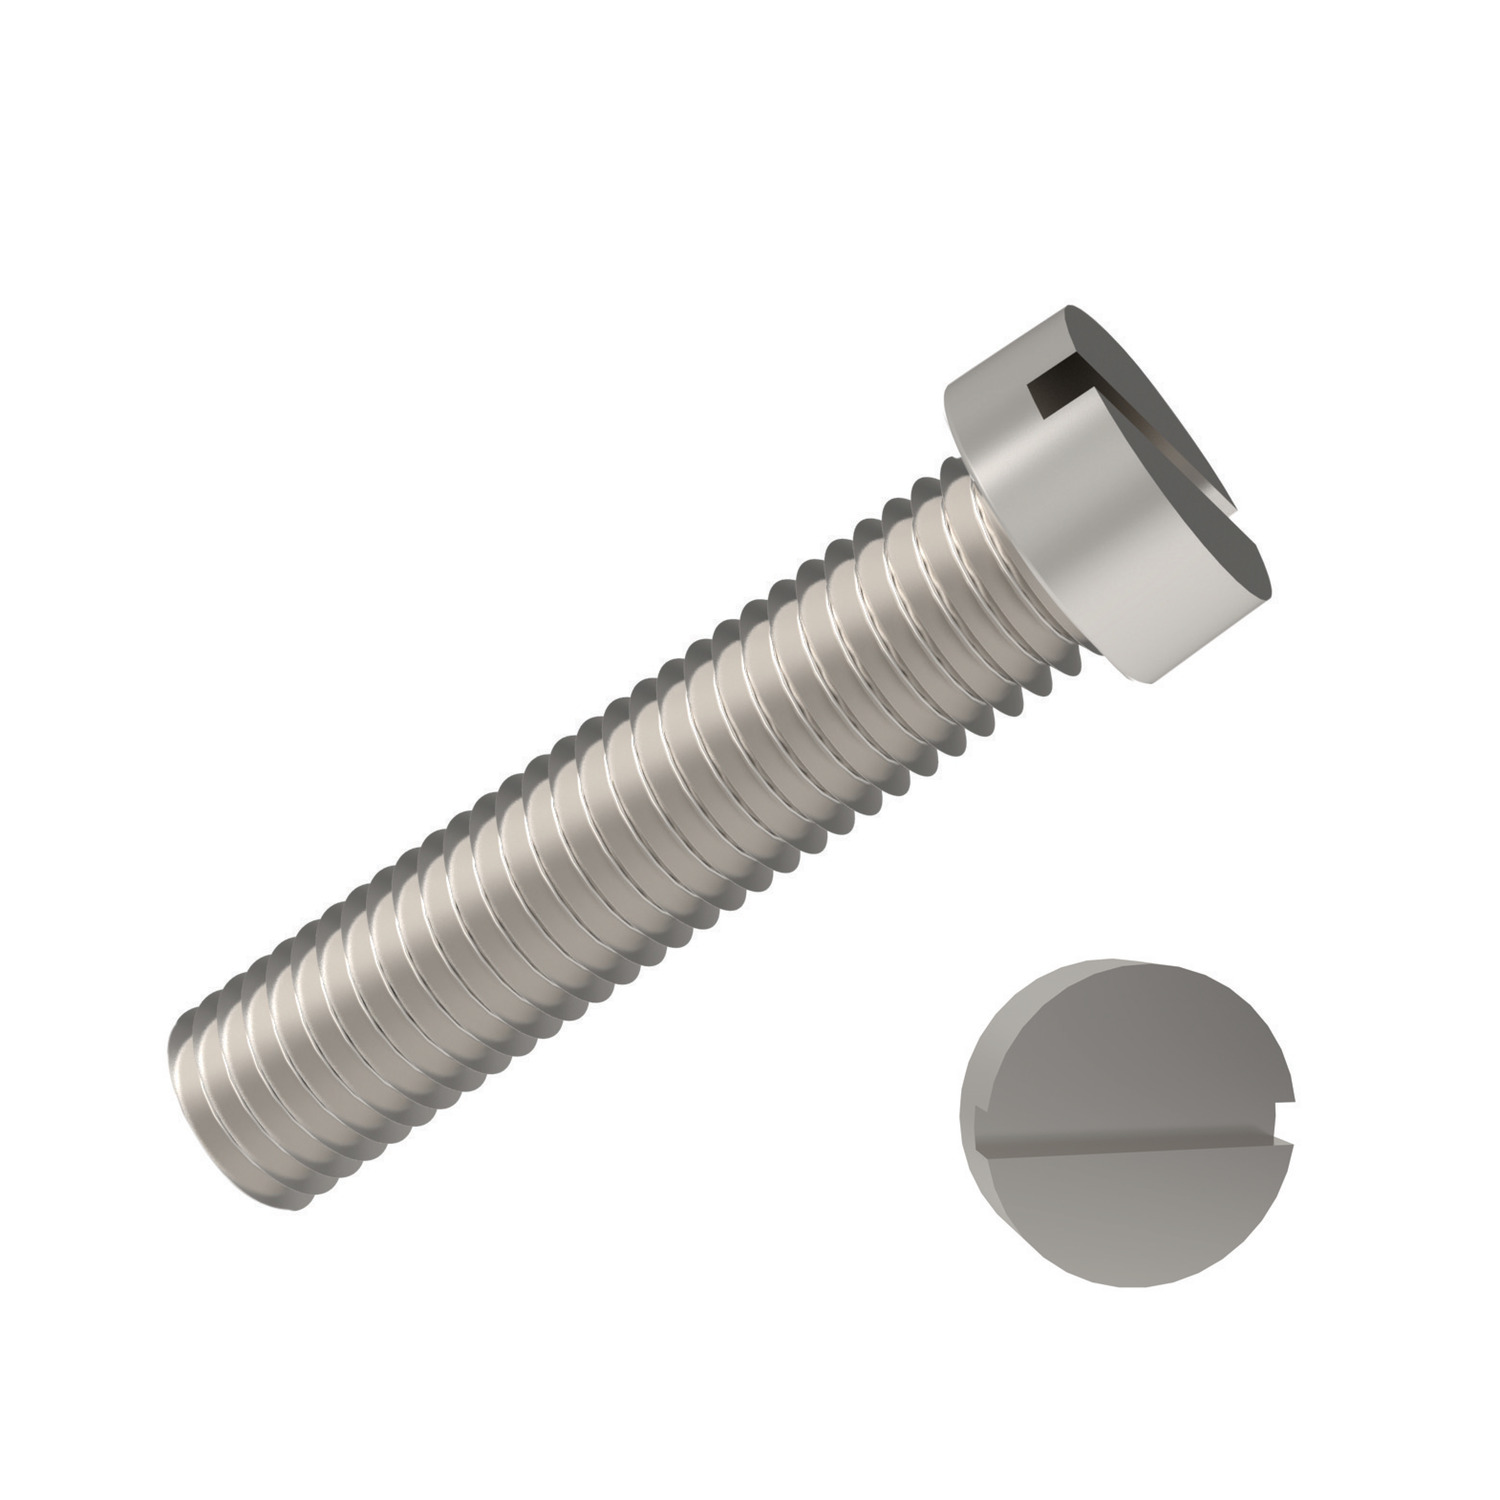 Slot Cheese Head Screws A2 stainless steel slot cheese head screws. Sizes range from M1,6 to M10. Manufactured to DIN 84.